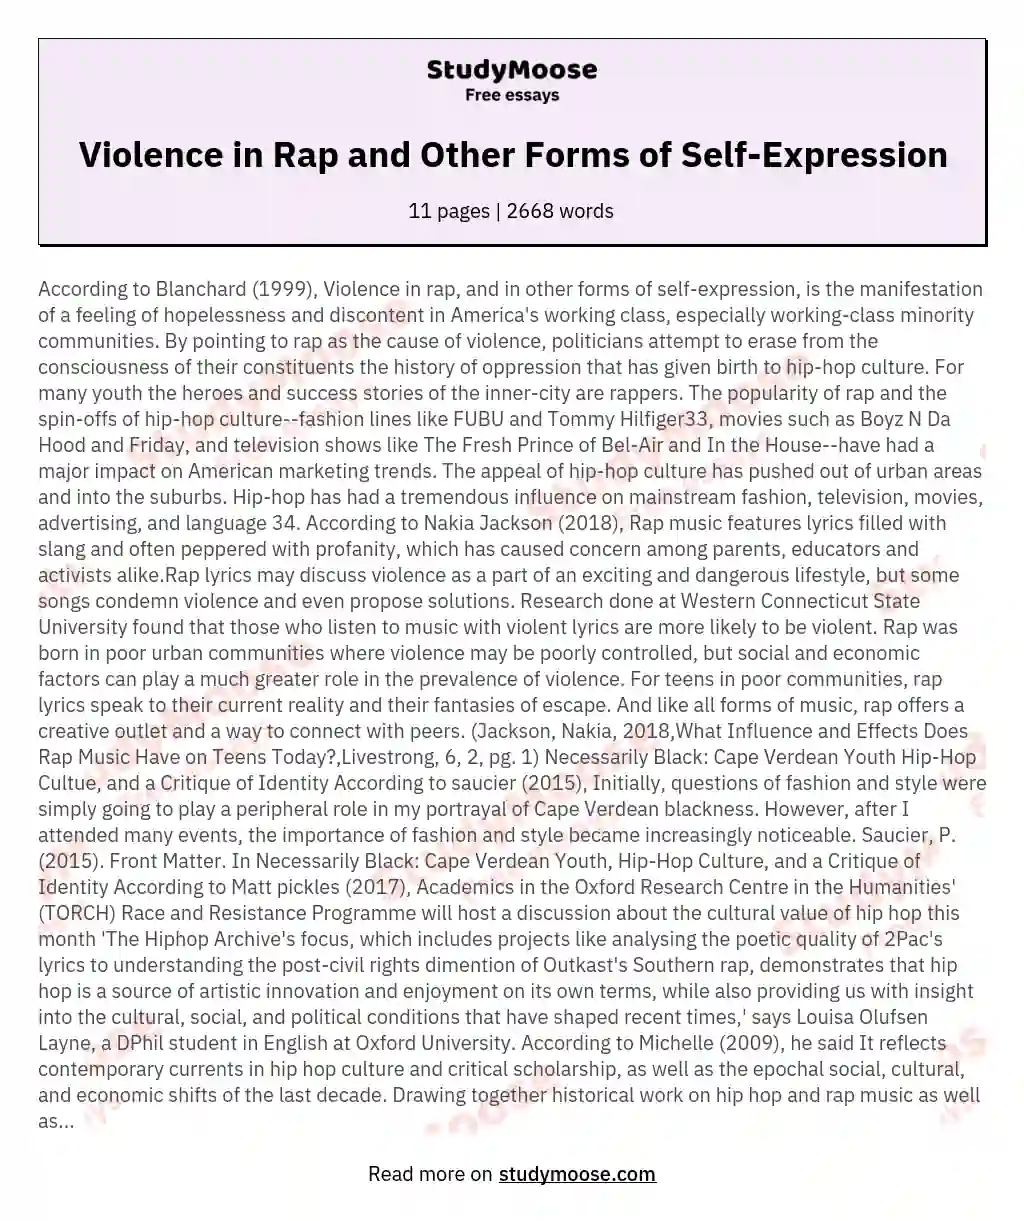 Violence in Rap and Other Forms of Self-Expression essay